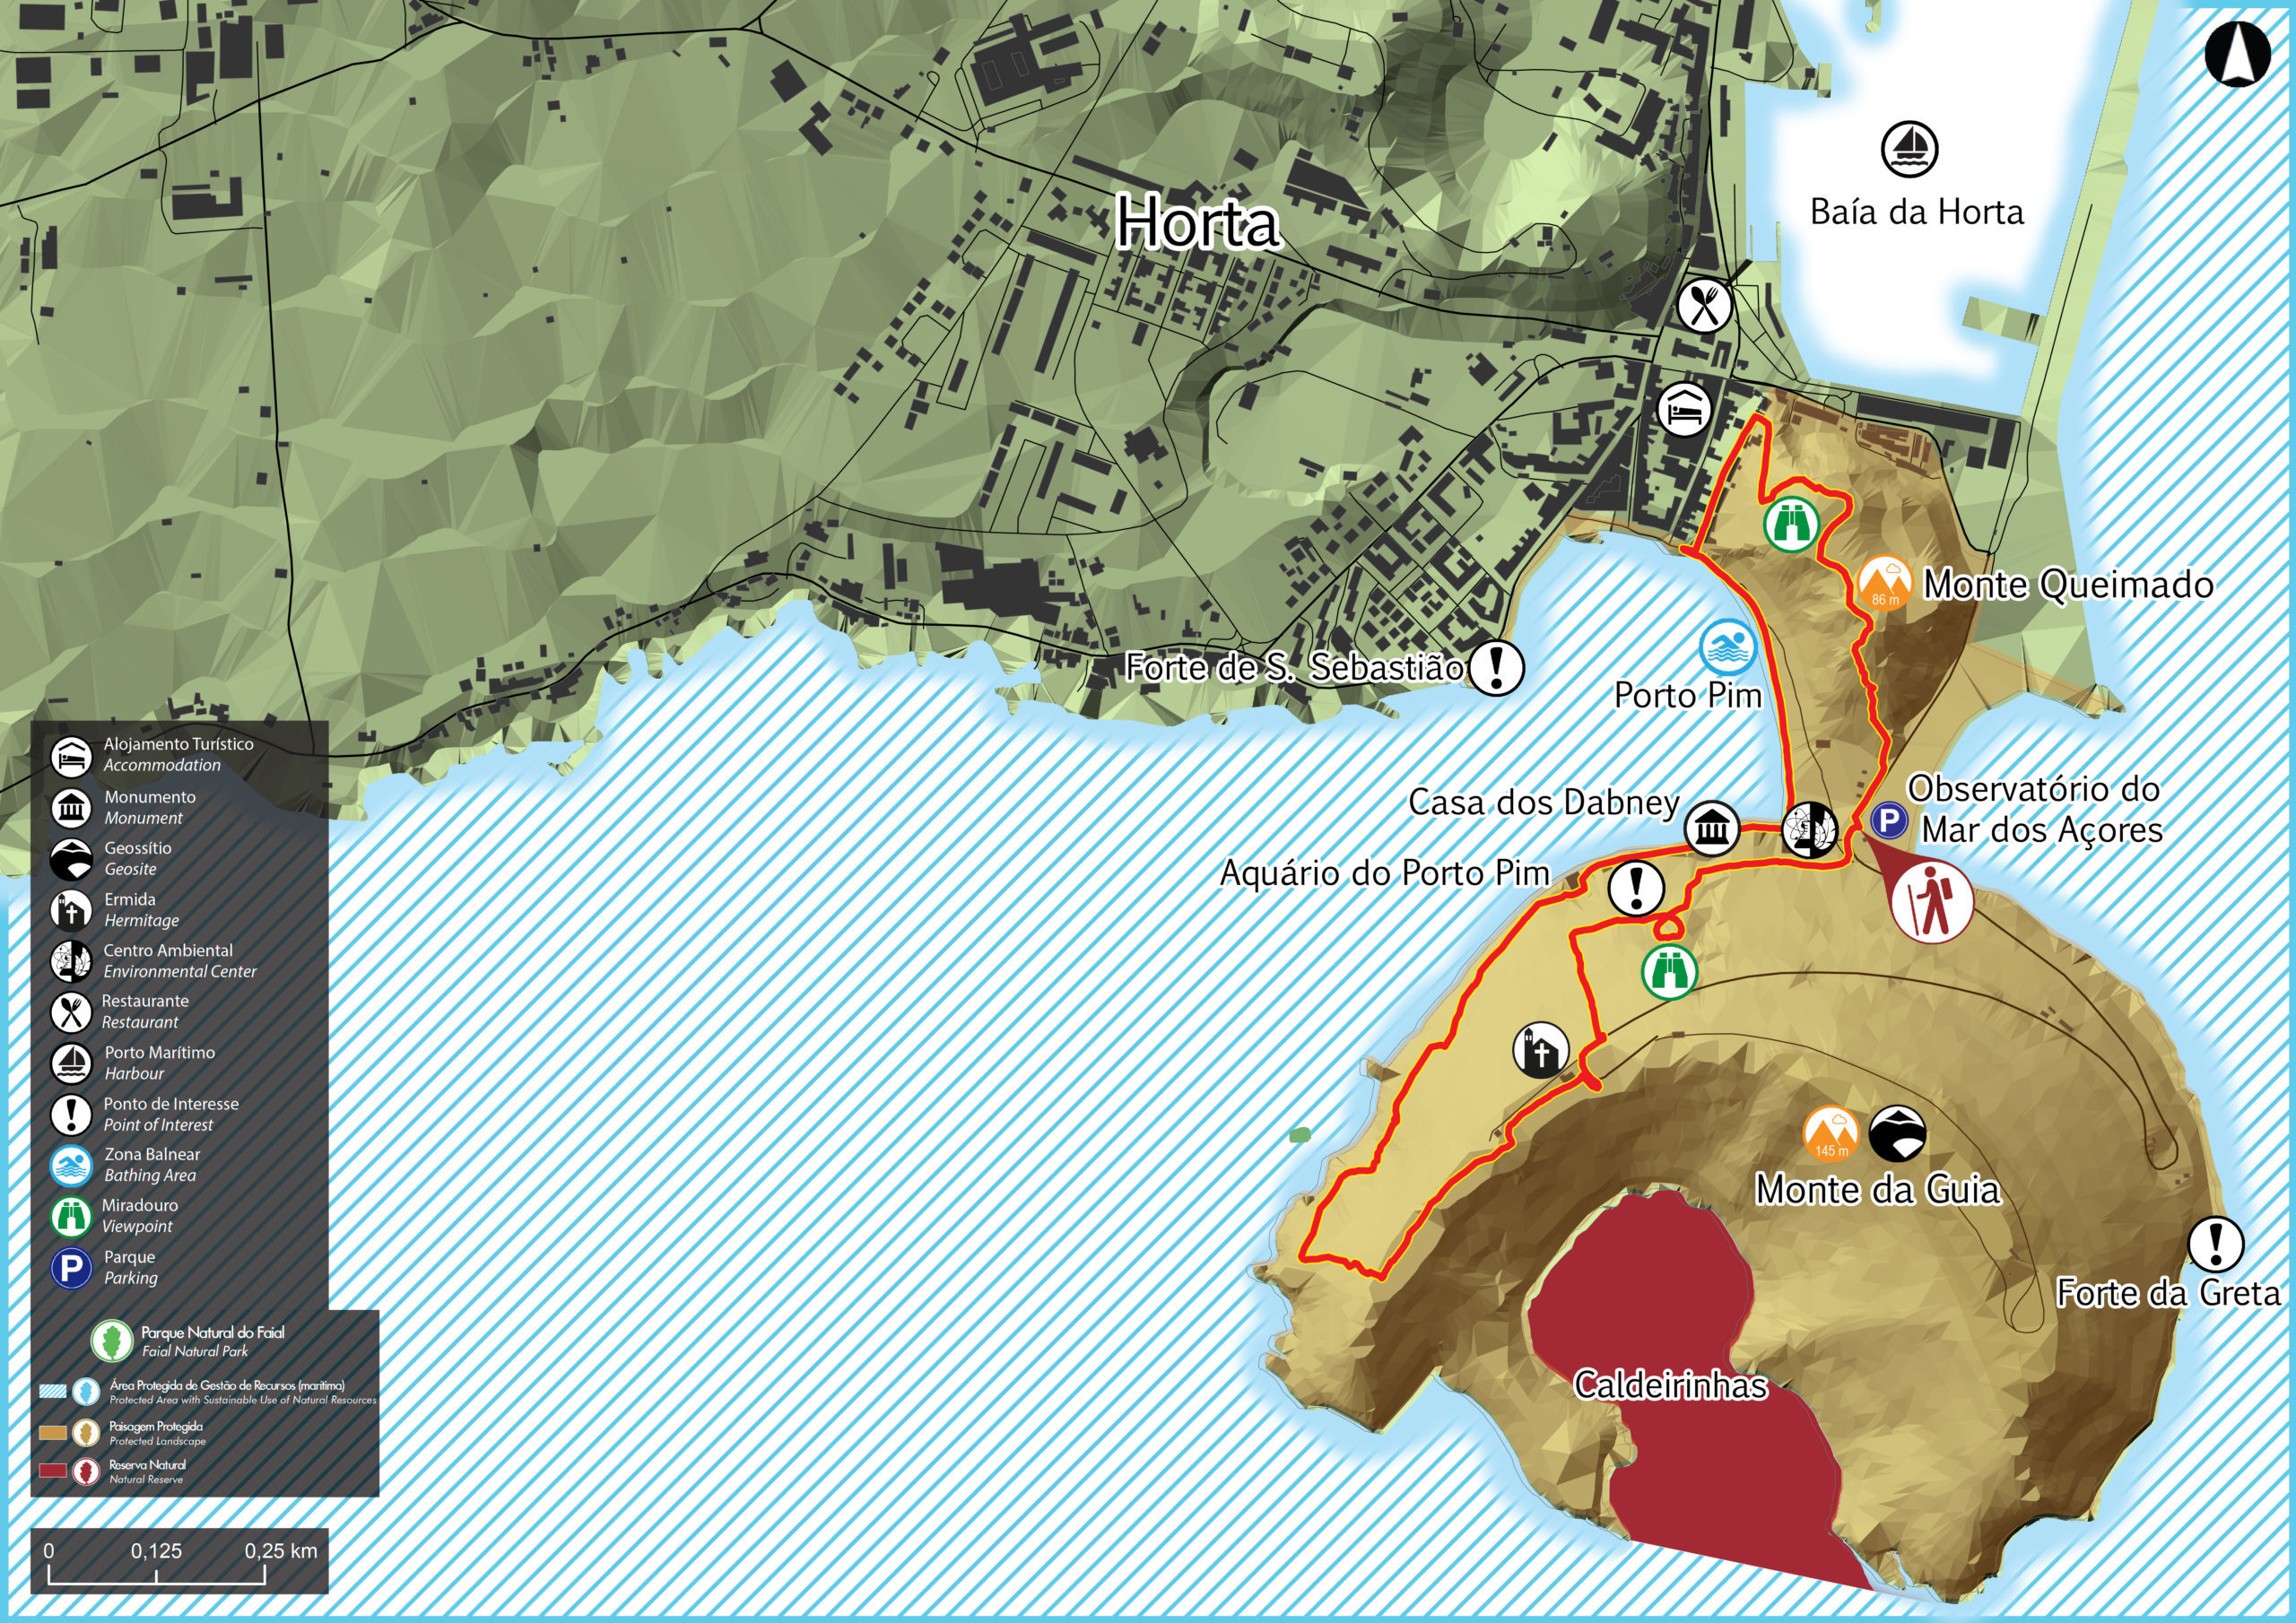 azores tour and trail map